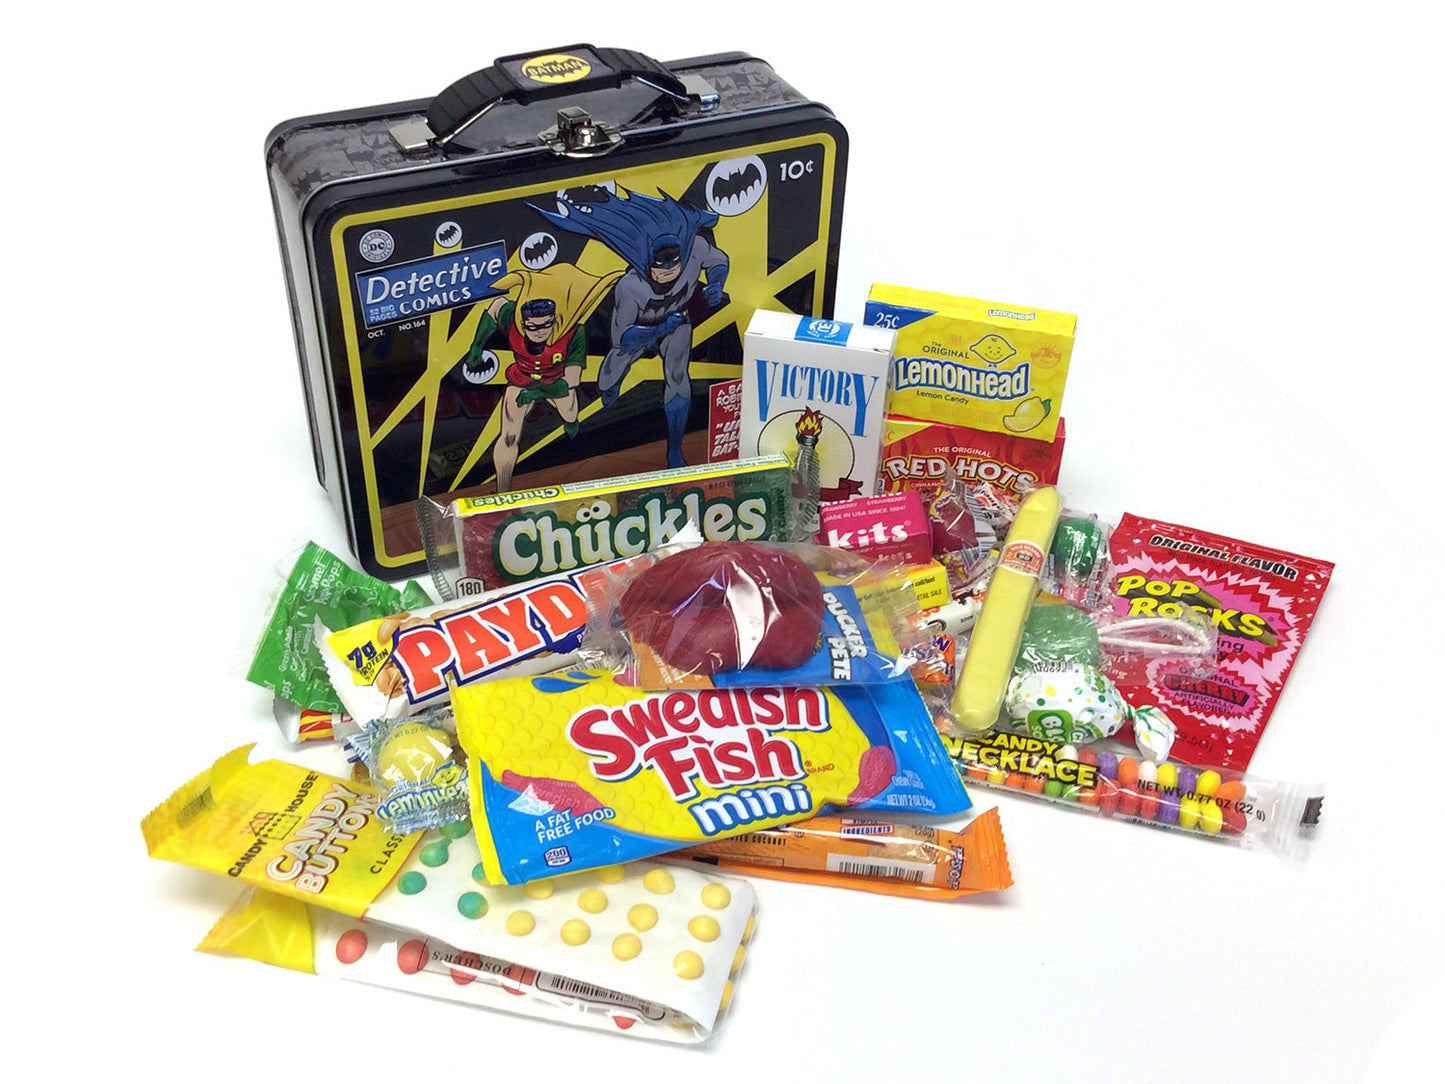 Premium Candy Assortment: 2 lbs and over 30 candies